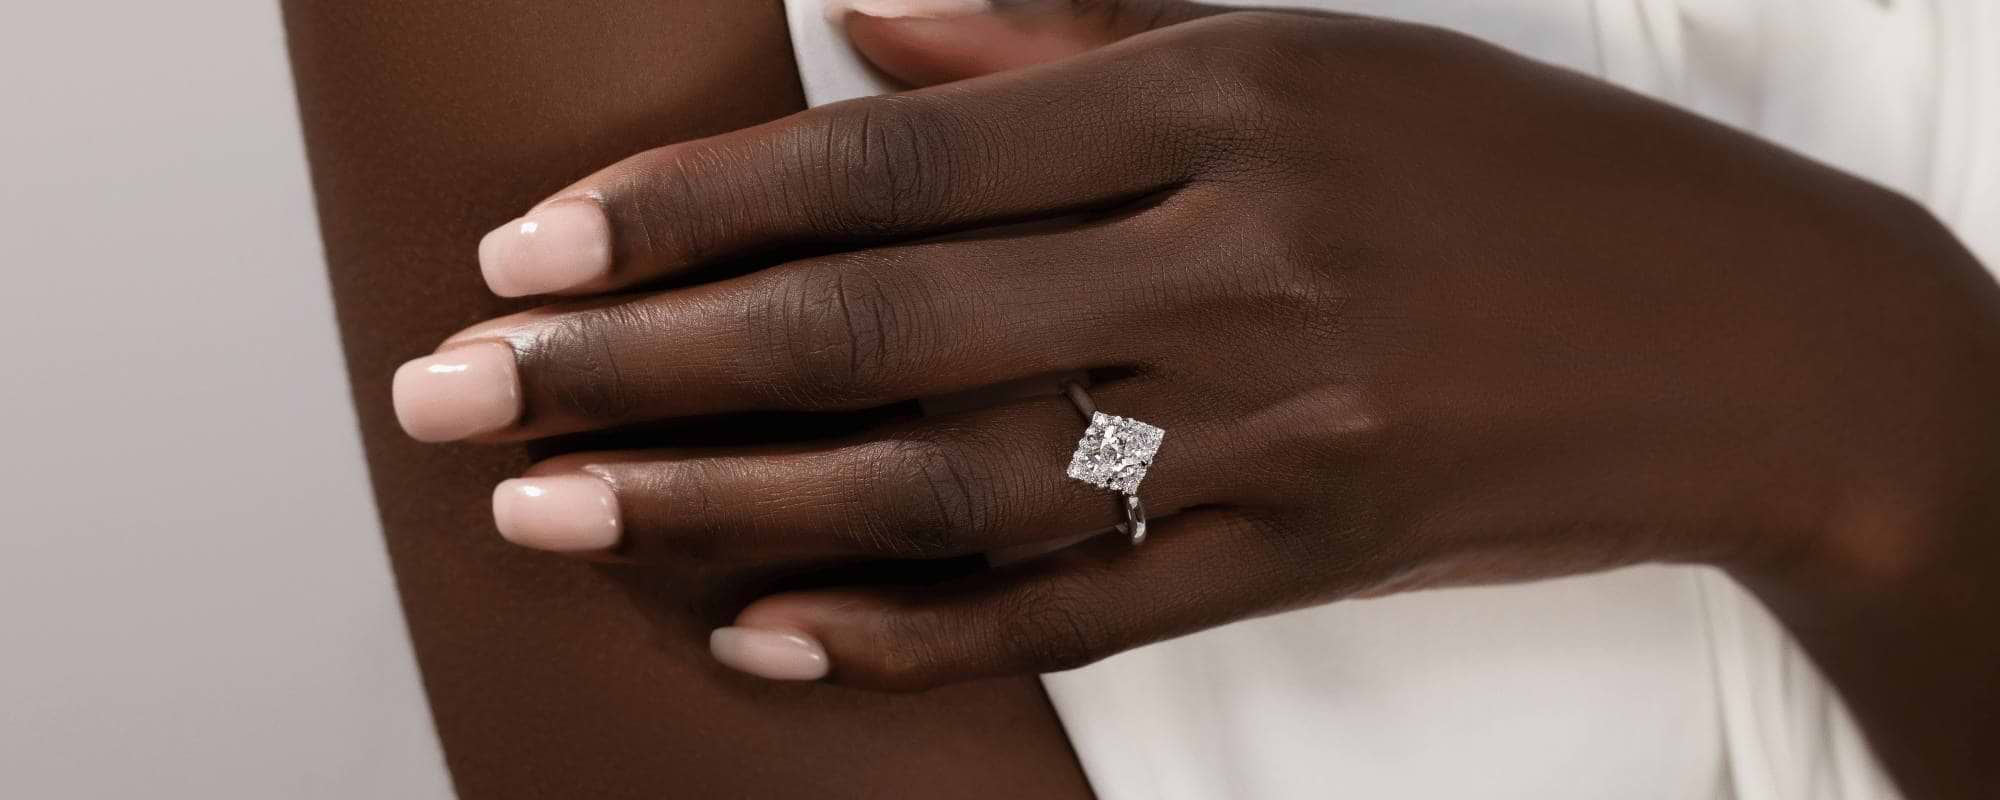 Top 10 Non-Traditional Engagement Rings